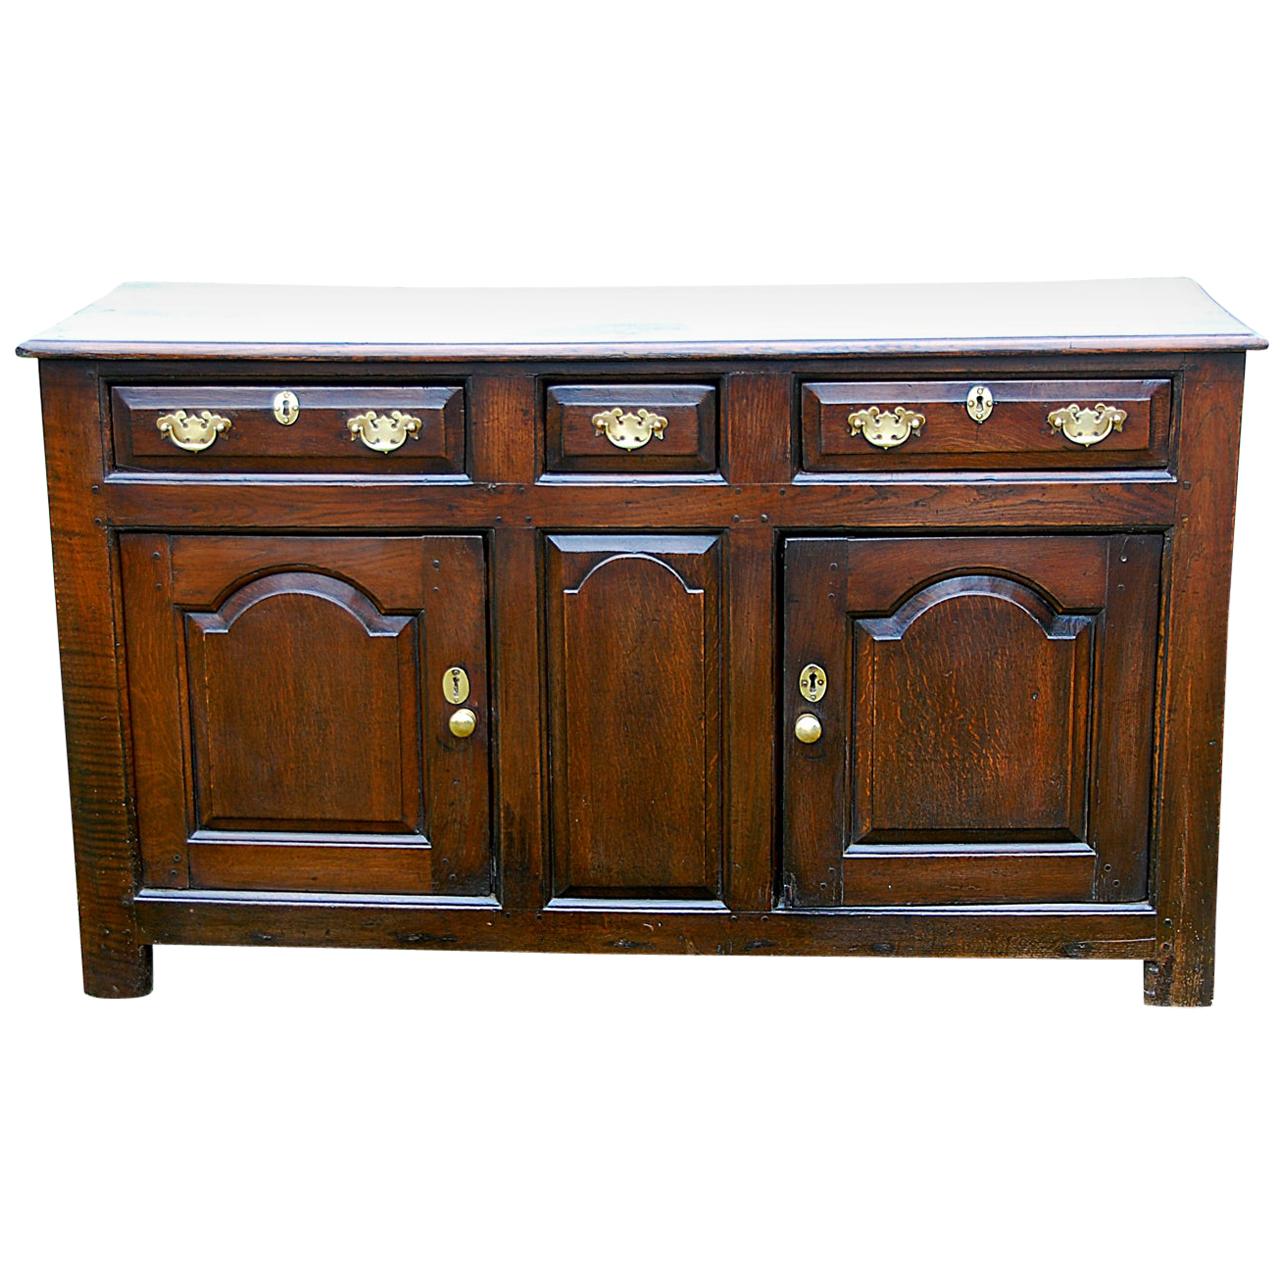 Welsh Georgian Oak Low Dresser with Three Drawers and Two Paneled Cupboard Doors